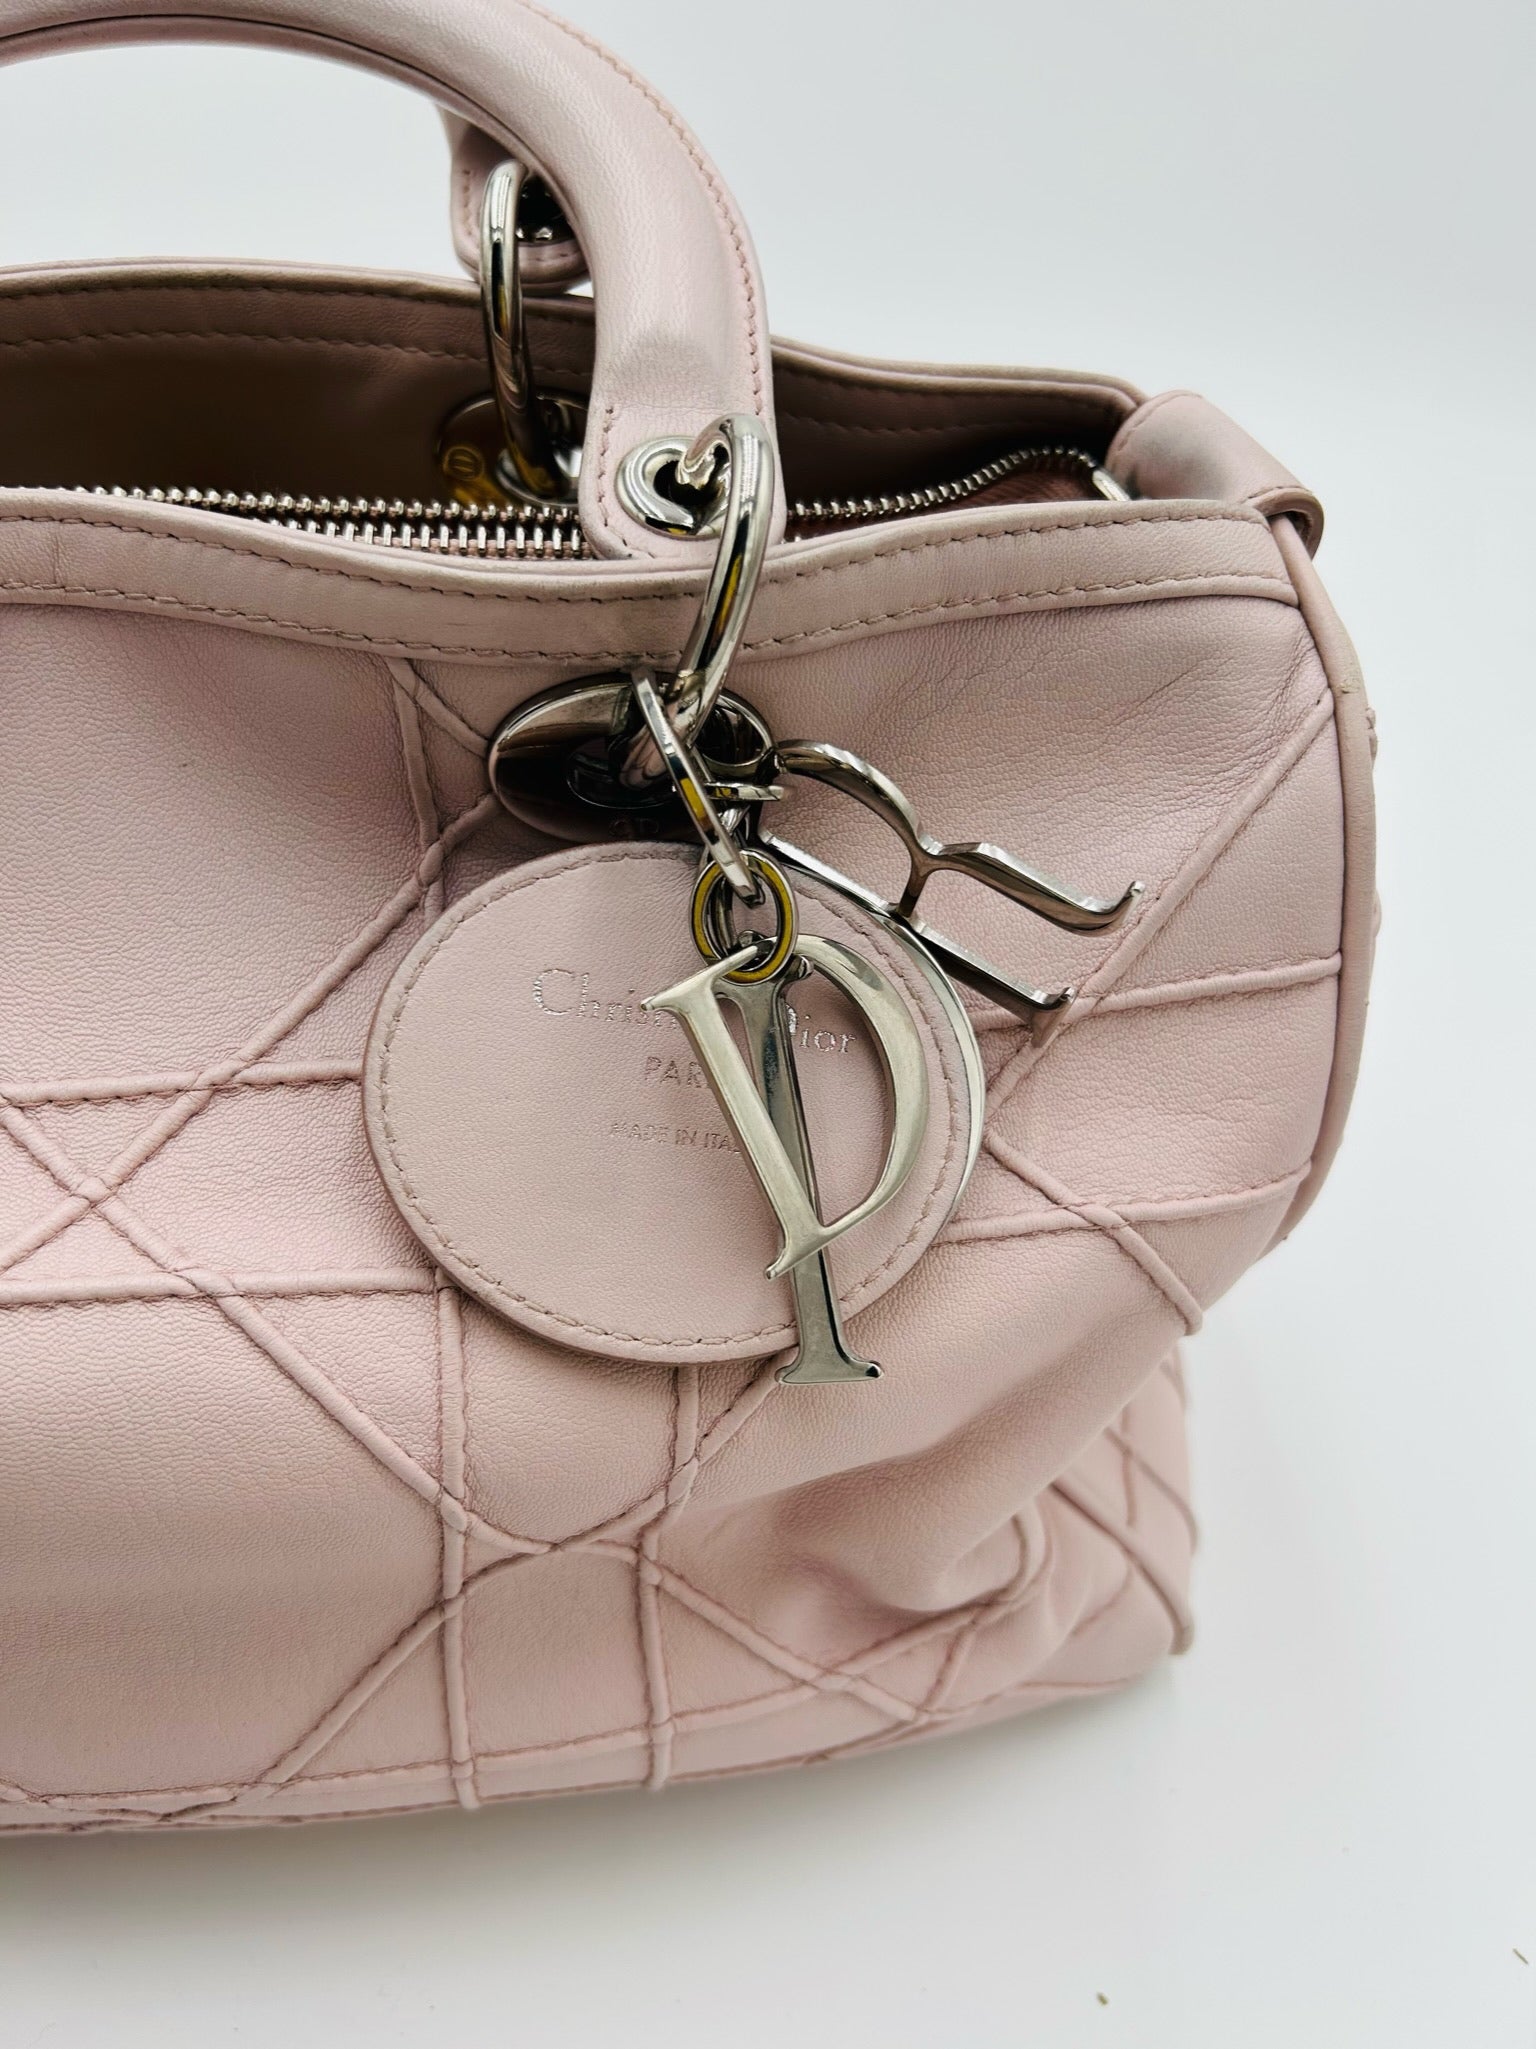 CHRISTIAN DIOR BLUSH PINK CANNAGE LEATHER GRANVILLE POLOCHON SATCHEL